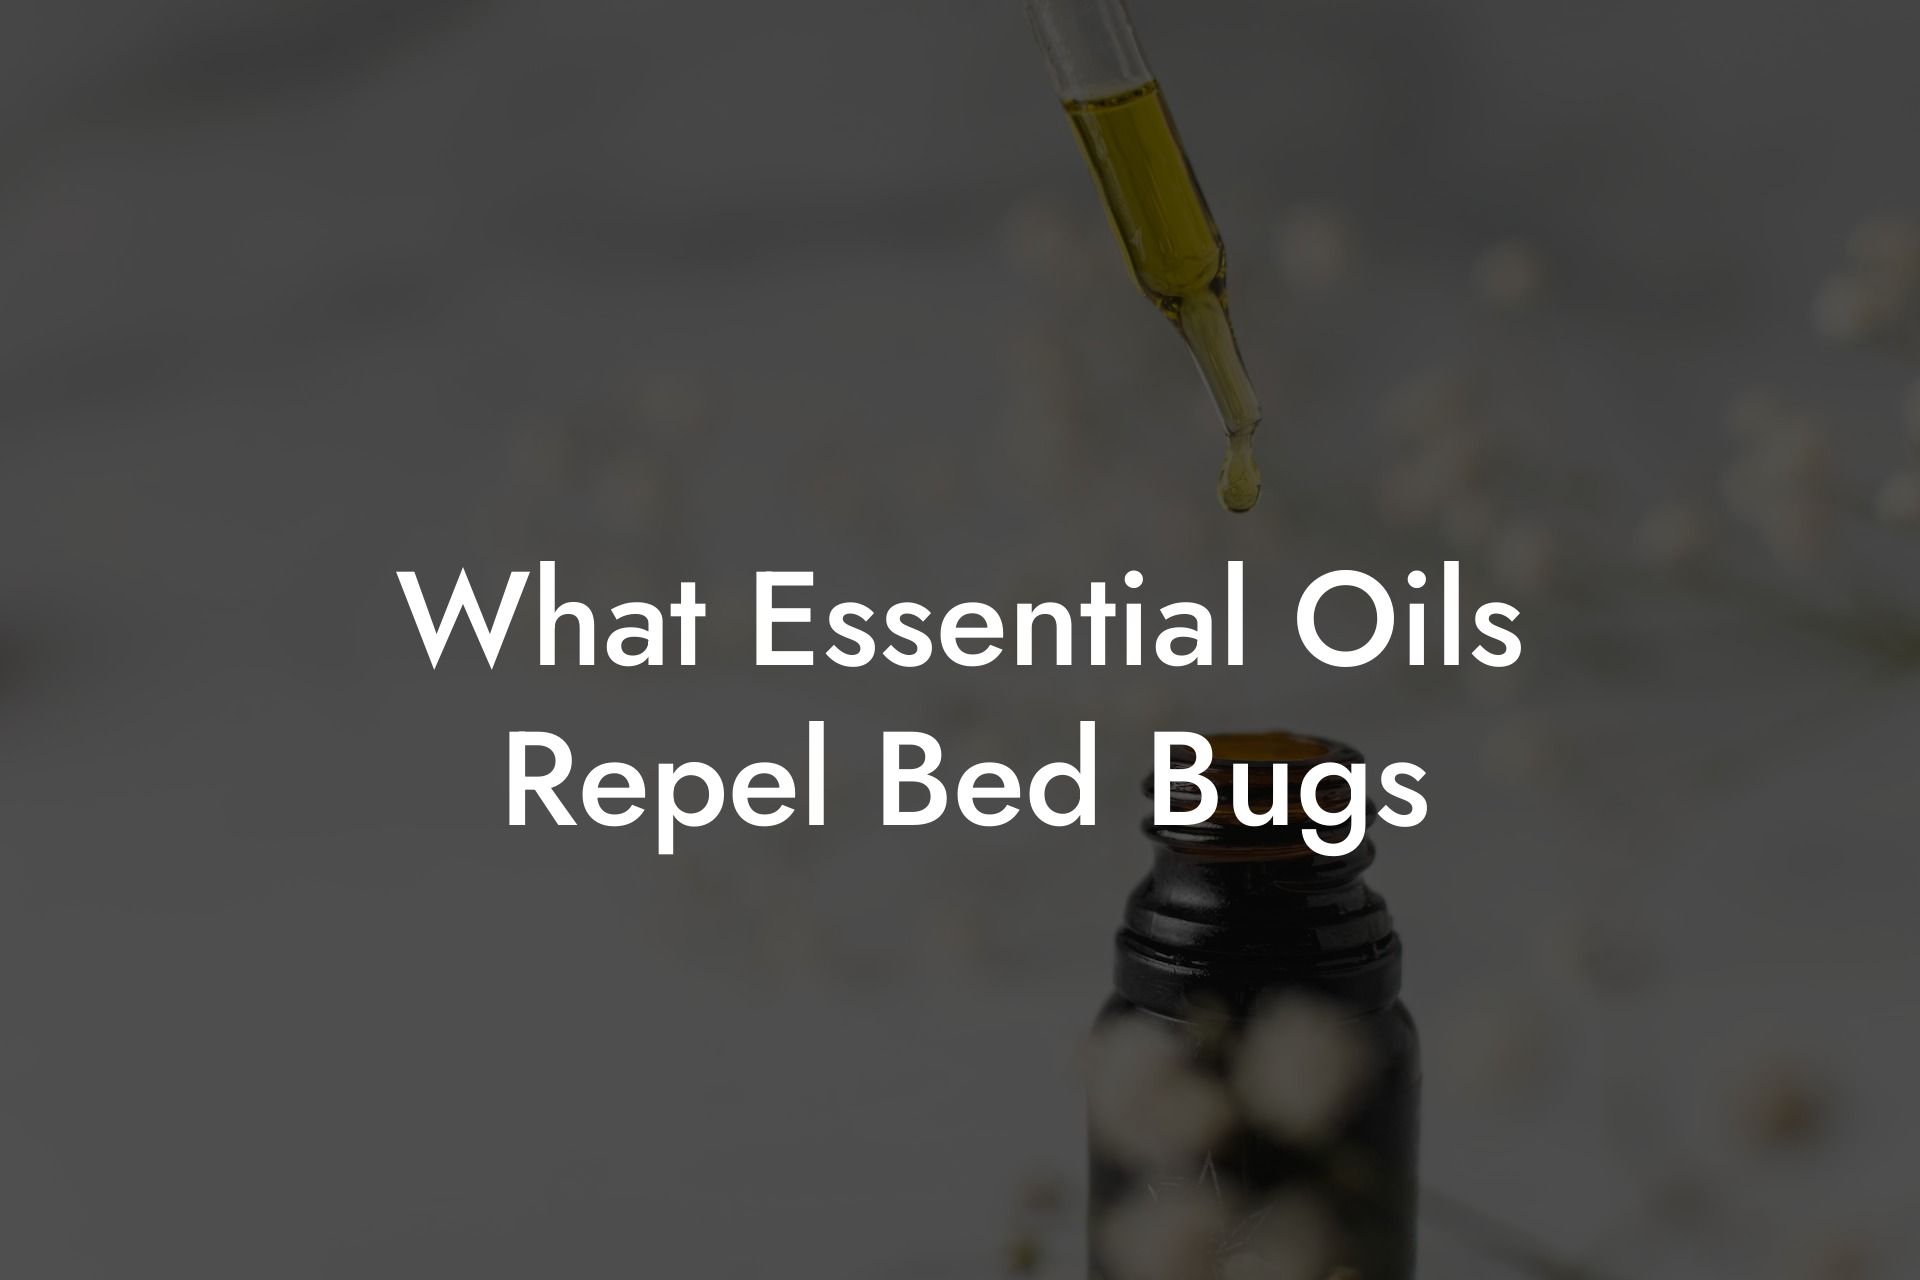 What Essential Oils Repel Bed Bugs